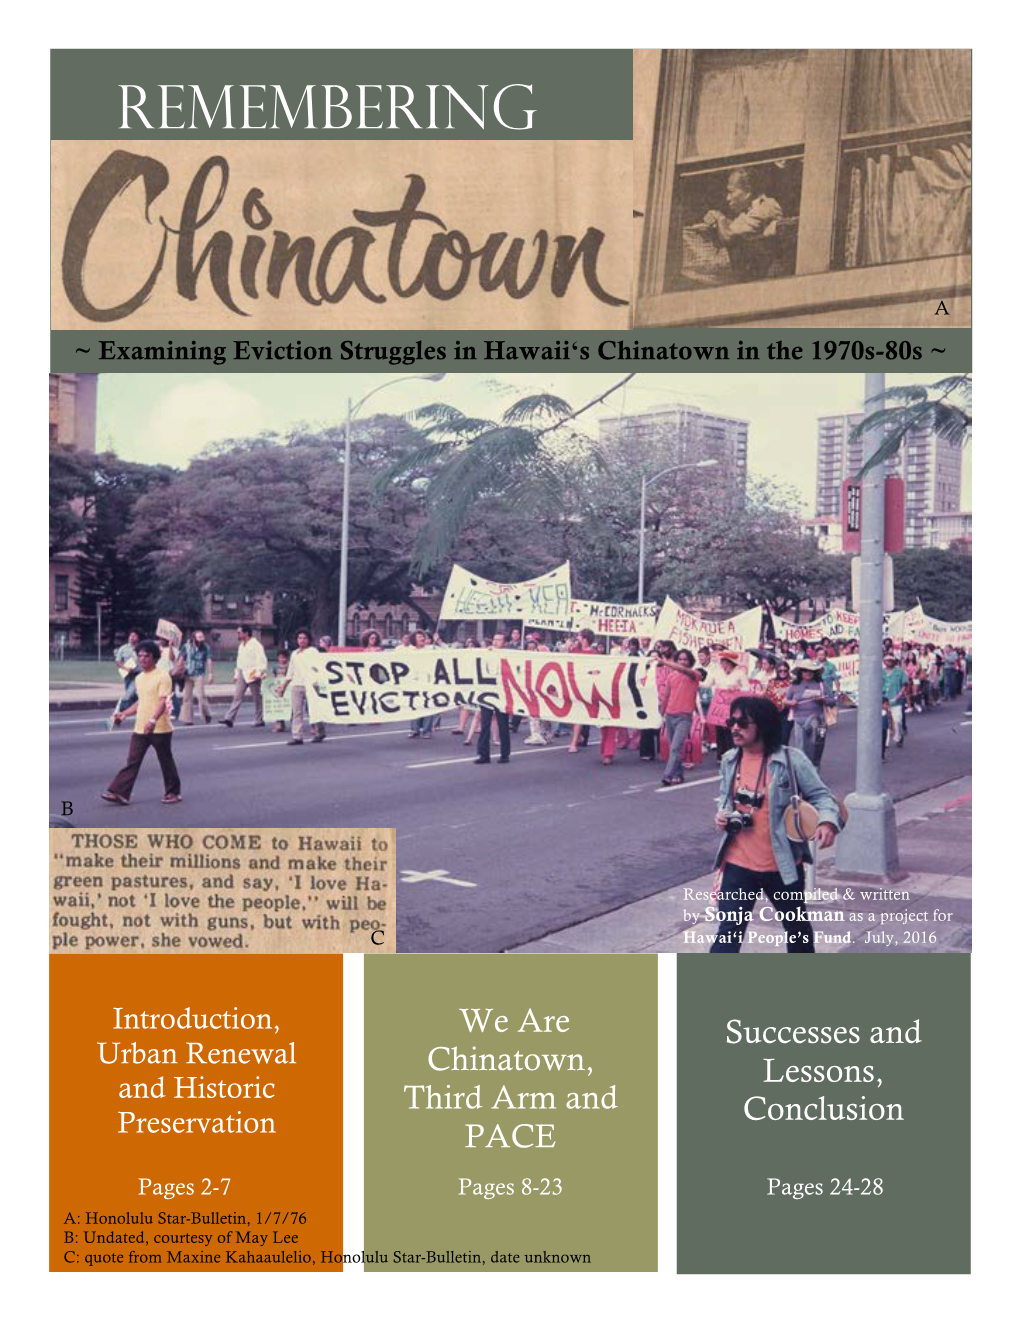 Chinatown Evictions Involved Numerous Individual and Communal a Actions in Resistance to Create a Large and Far-Reaching Impact